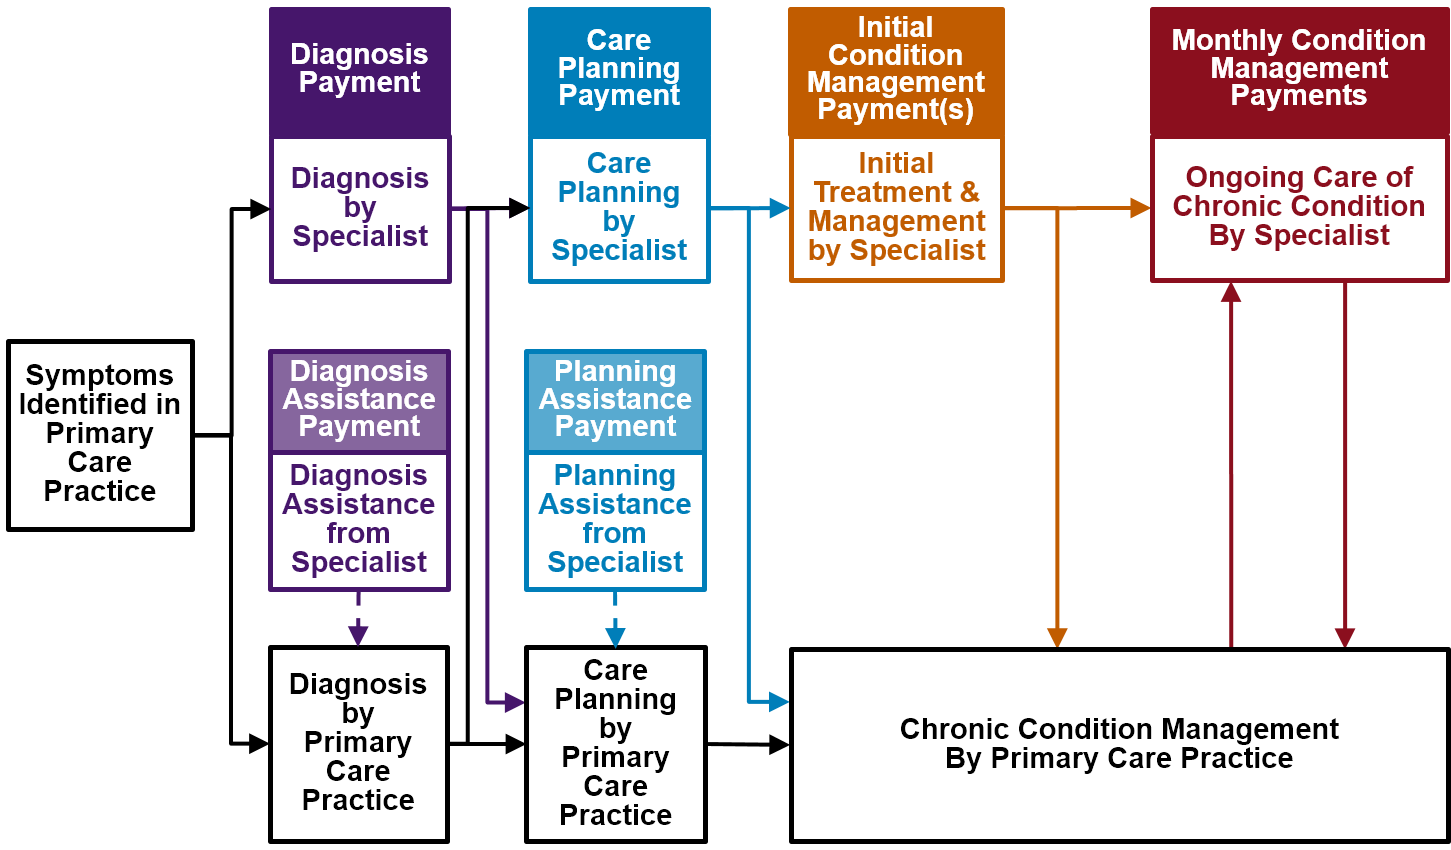 Payments in Each Phase of Care<br>Under Patient-Centered Payment for Care of Chronic Conditions